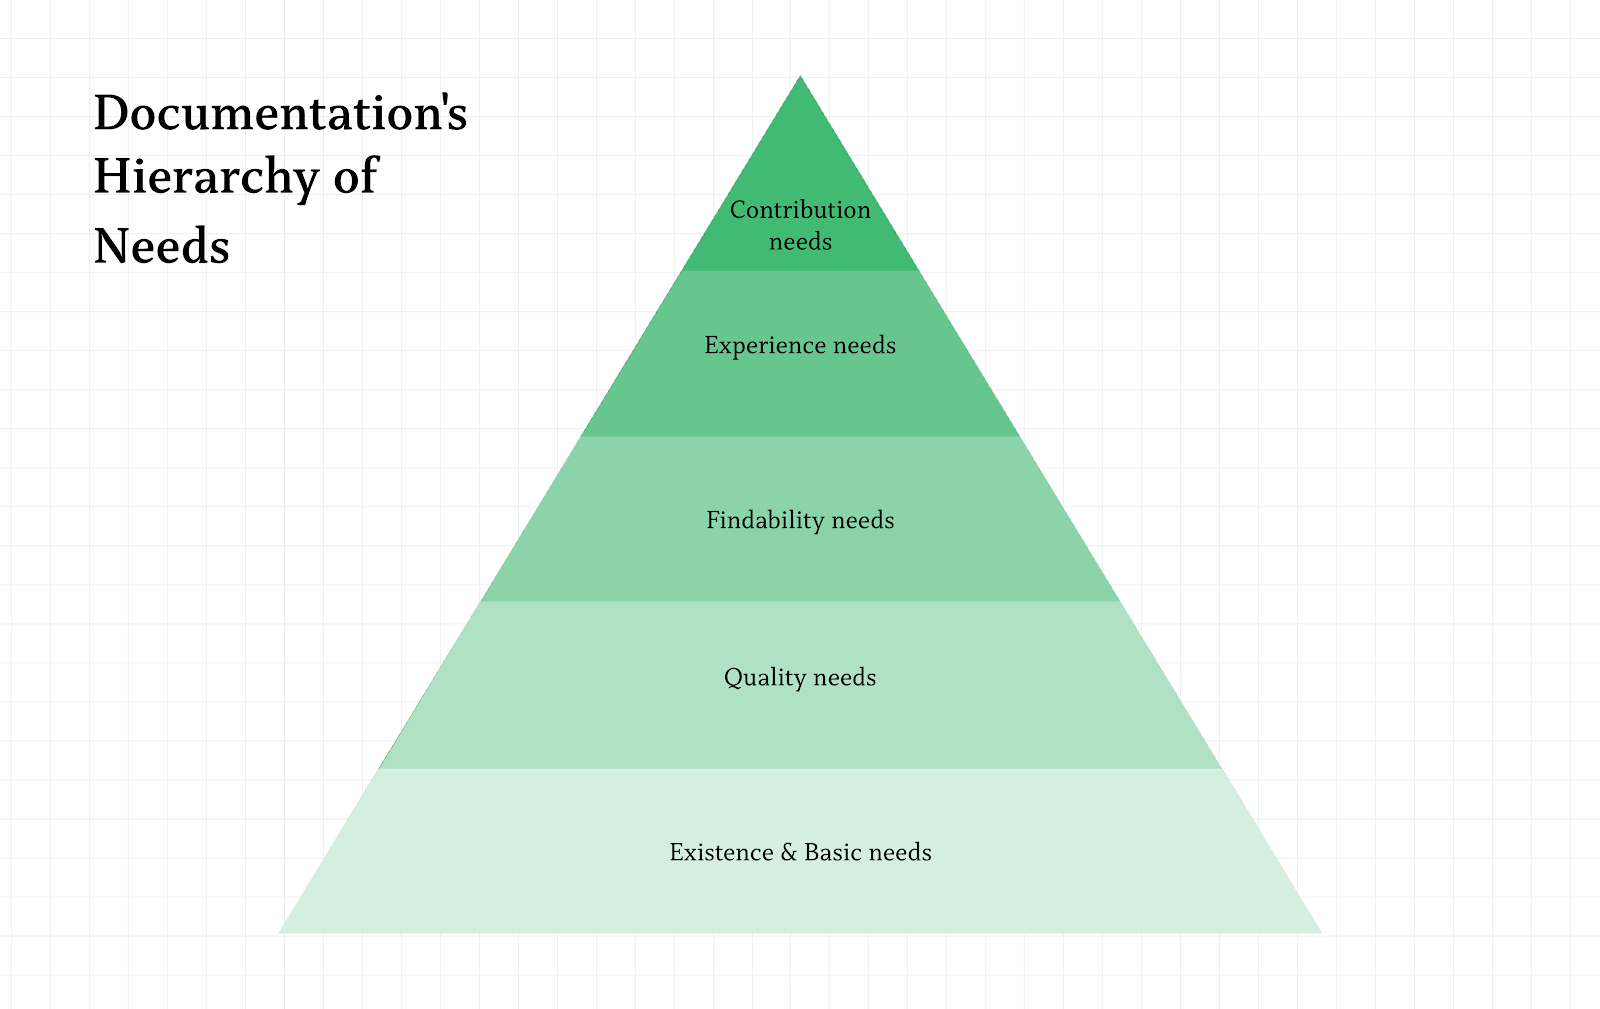 Applying Maslow's Hierarchy of Needs to Documentation | MongoDB